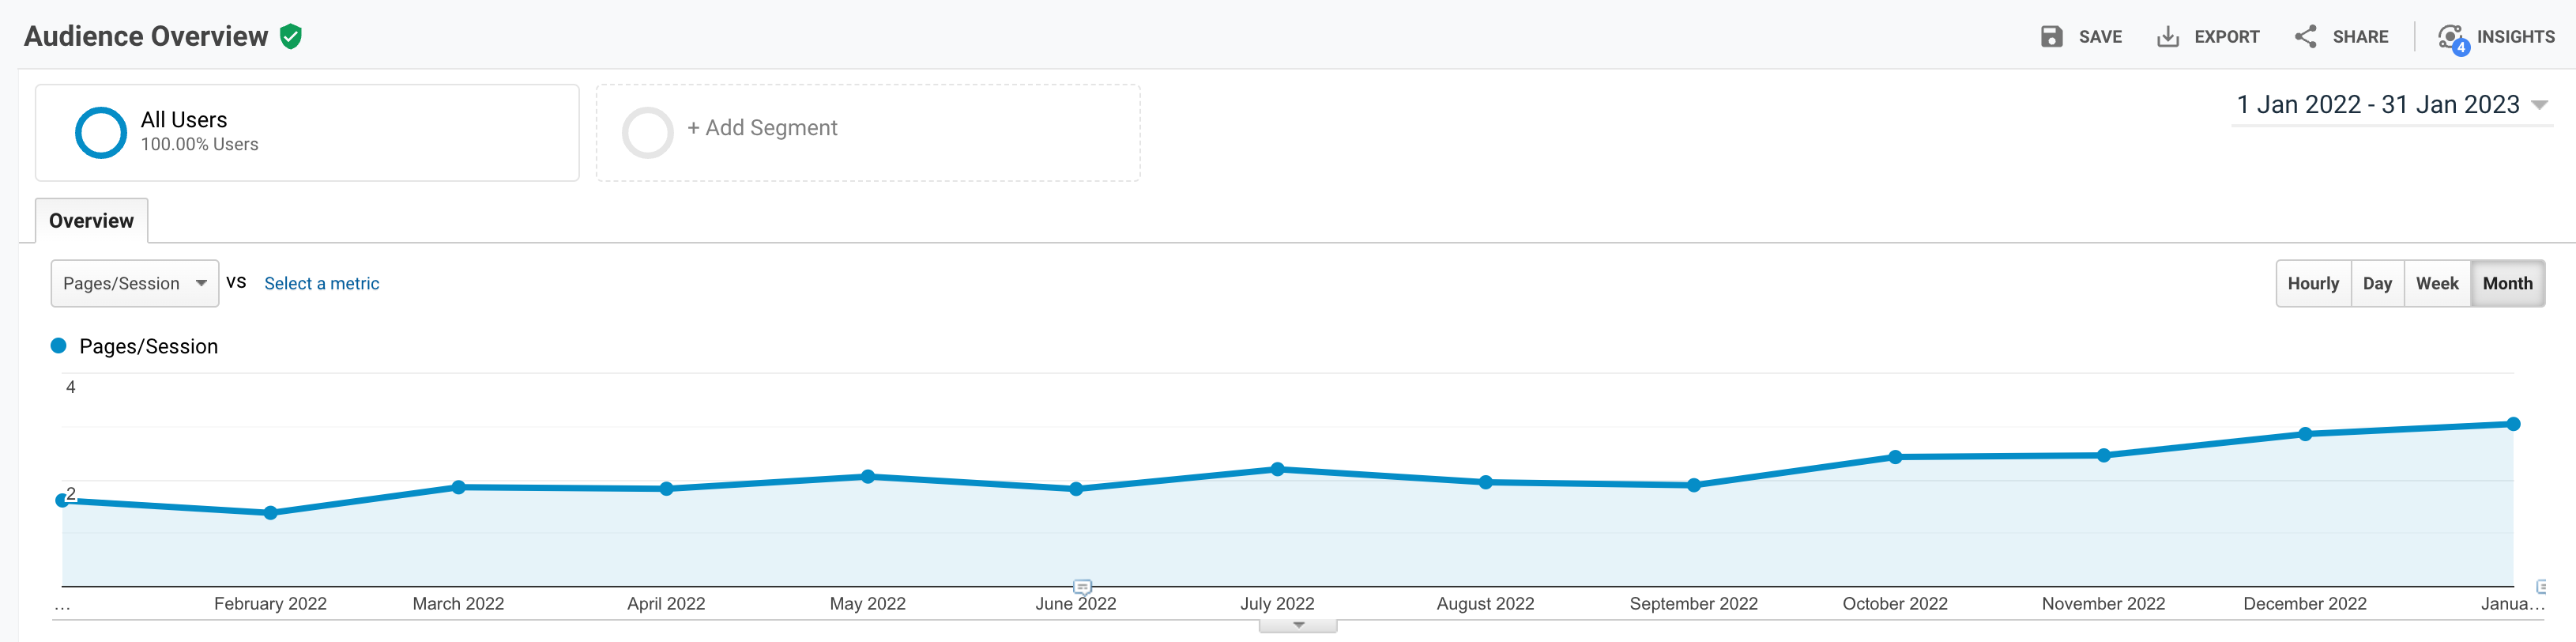 image showing pageviews per user over time for a niche seo website